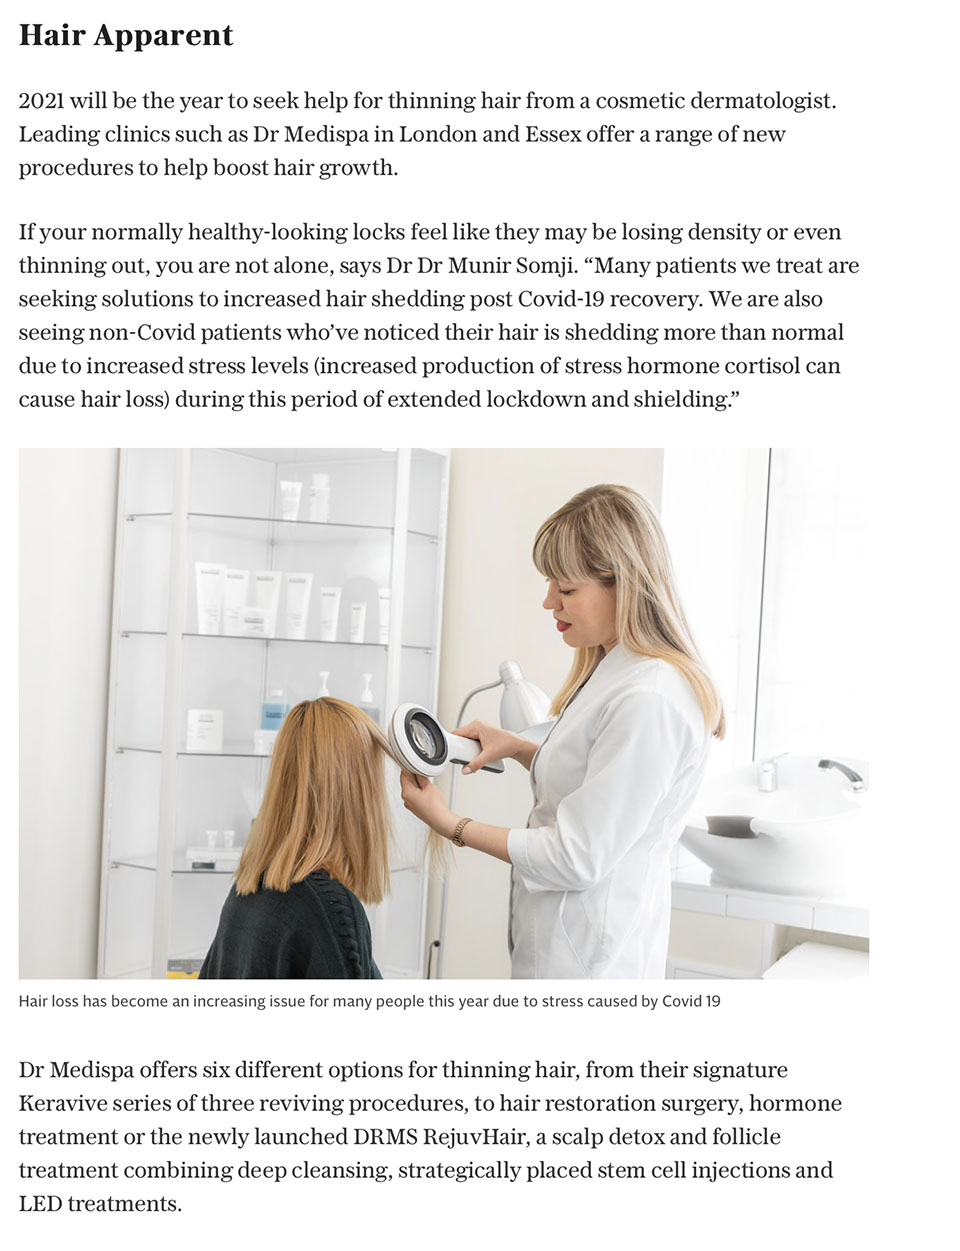 Dr Medispa on New Procedures to Help Boost Hair Growth